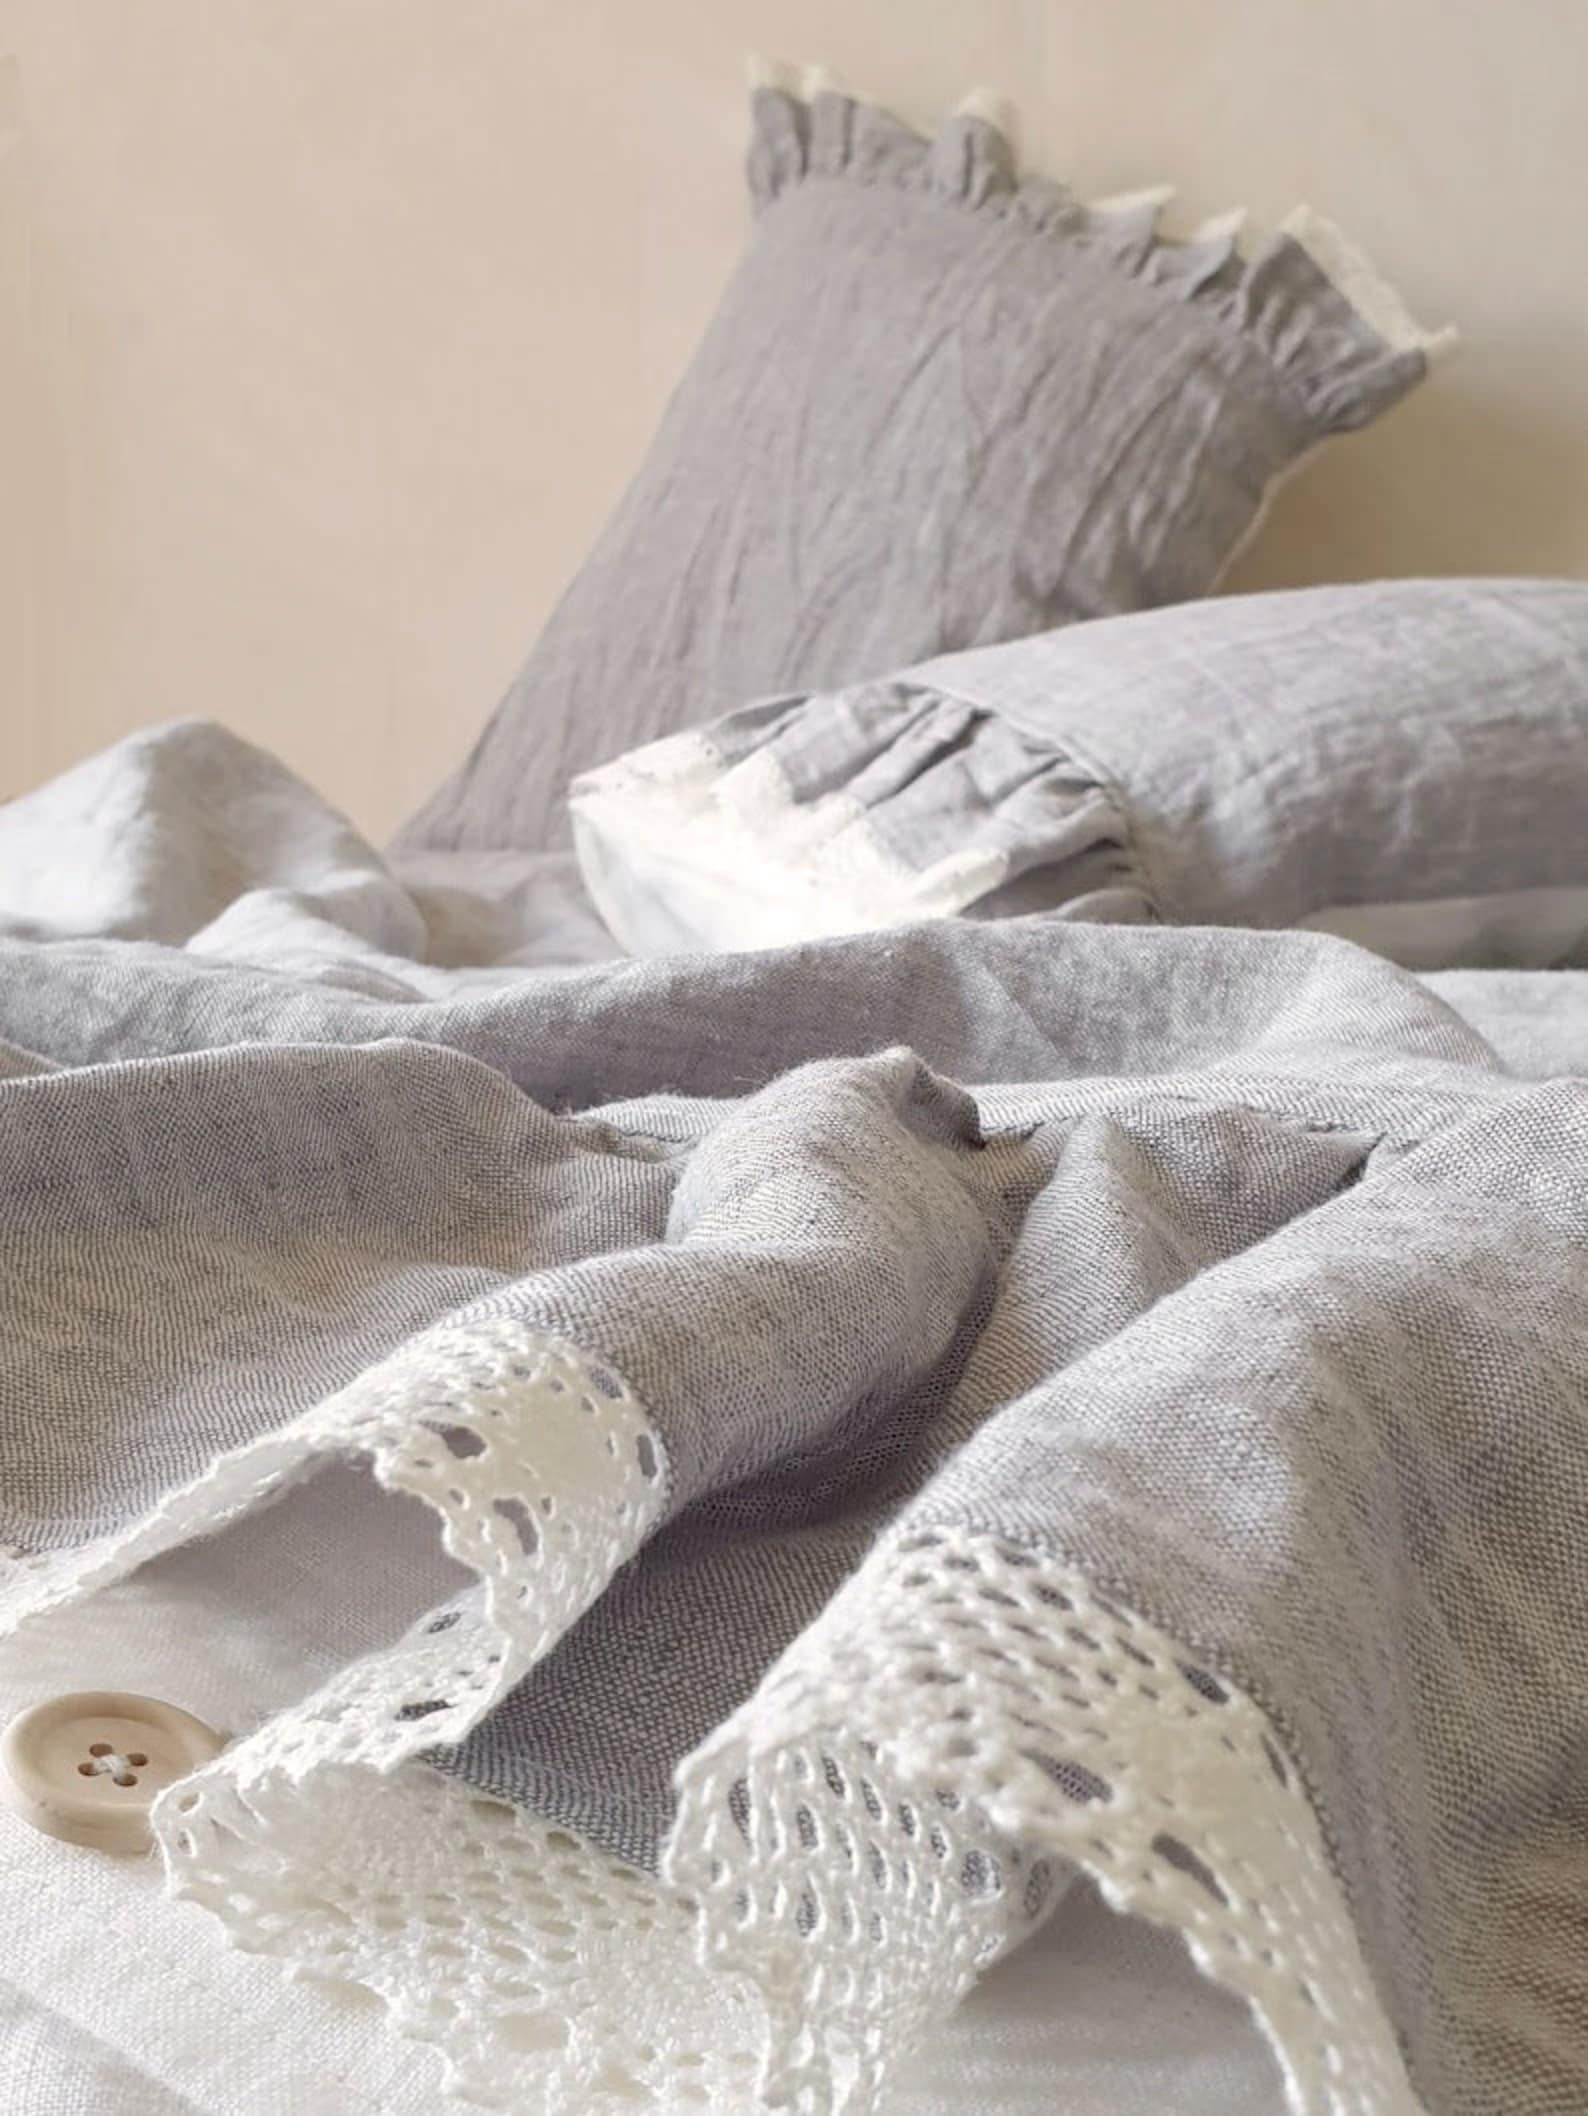 BEDDING SET With Ruffled Lace at the Bottom in Melange Grey - Etsy